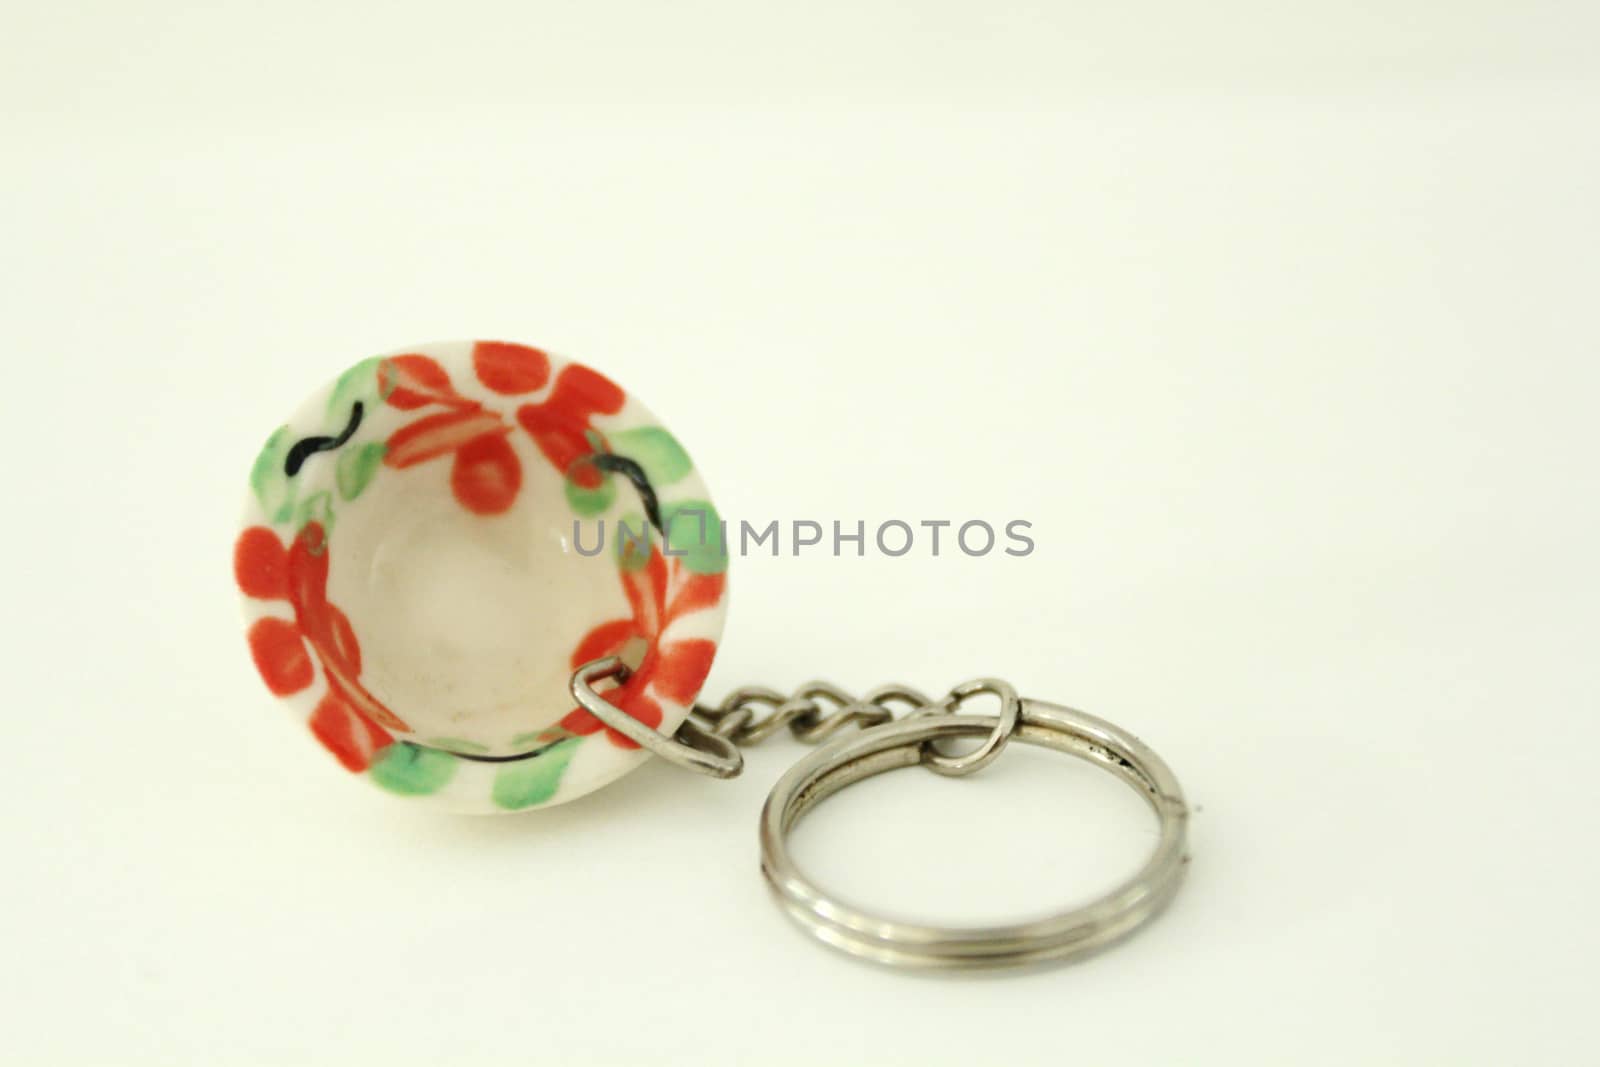 The bowl key ring made from ceramic and flowers paint.